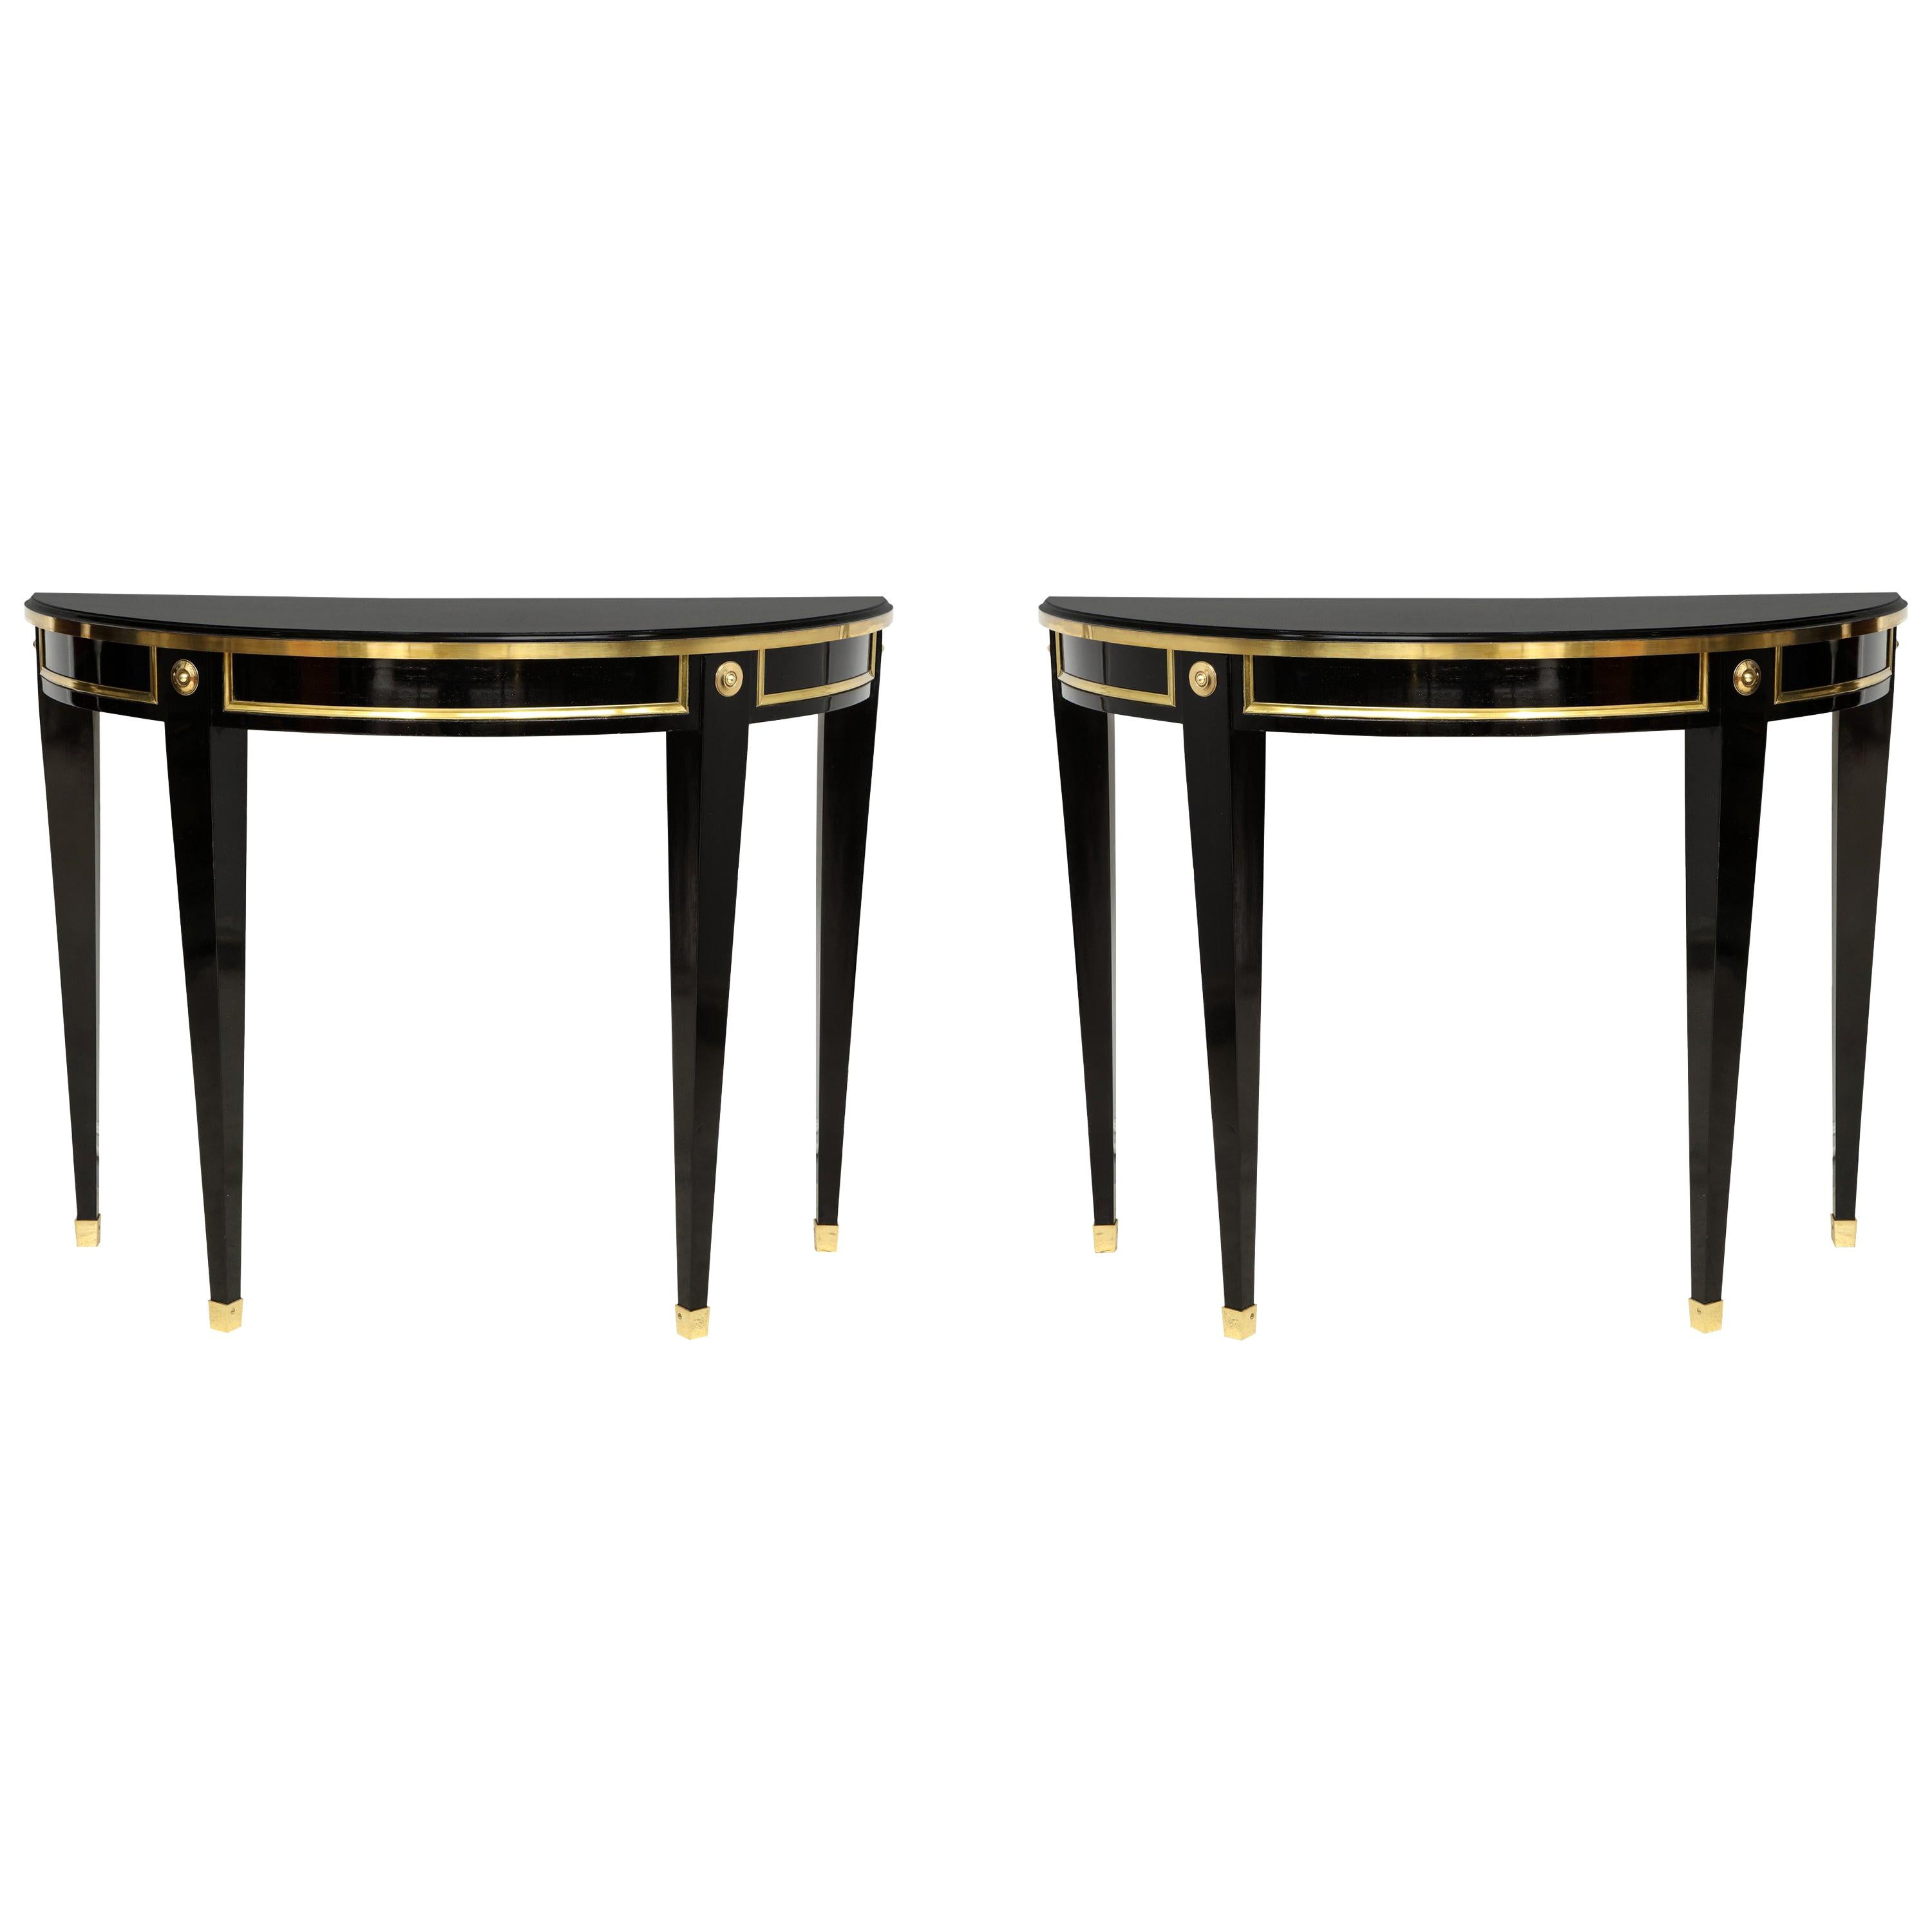 Pair of Bespoke Consoles in the Neoclassic Style with Brass Banding